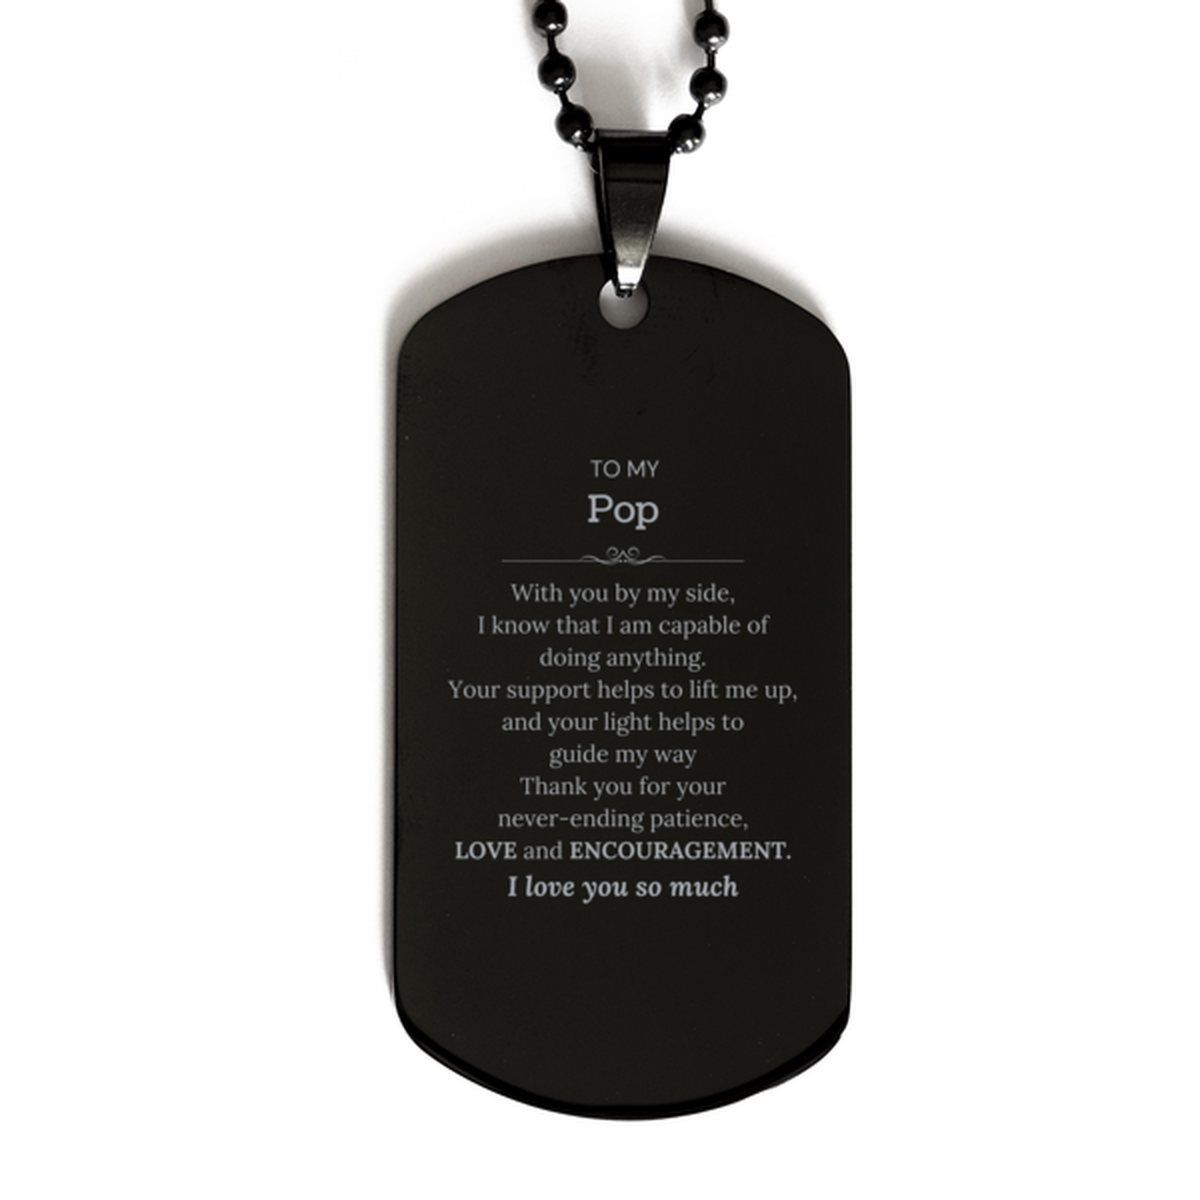 Appreciation Pop Black Dog Tag Gifts, To My Pop Birthday Christmas Wedding Keepsake Gifts for Pop With you by my side, I know that I am capable of doing anything. I love you so much